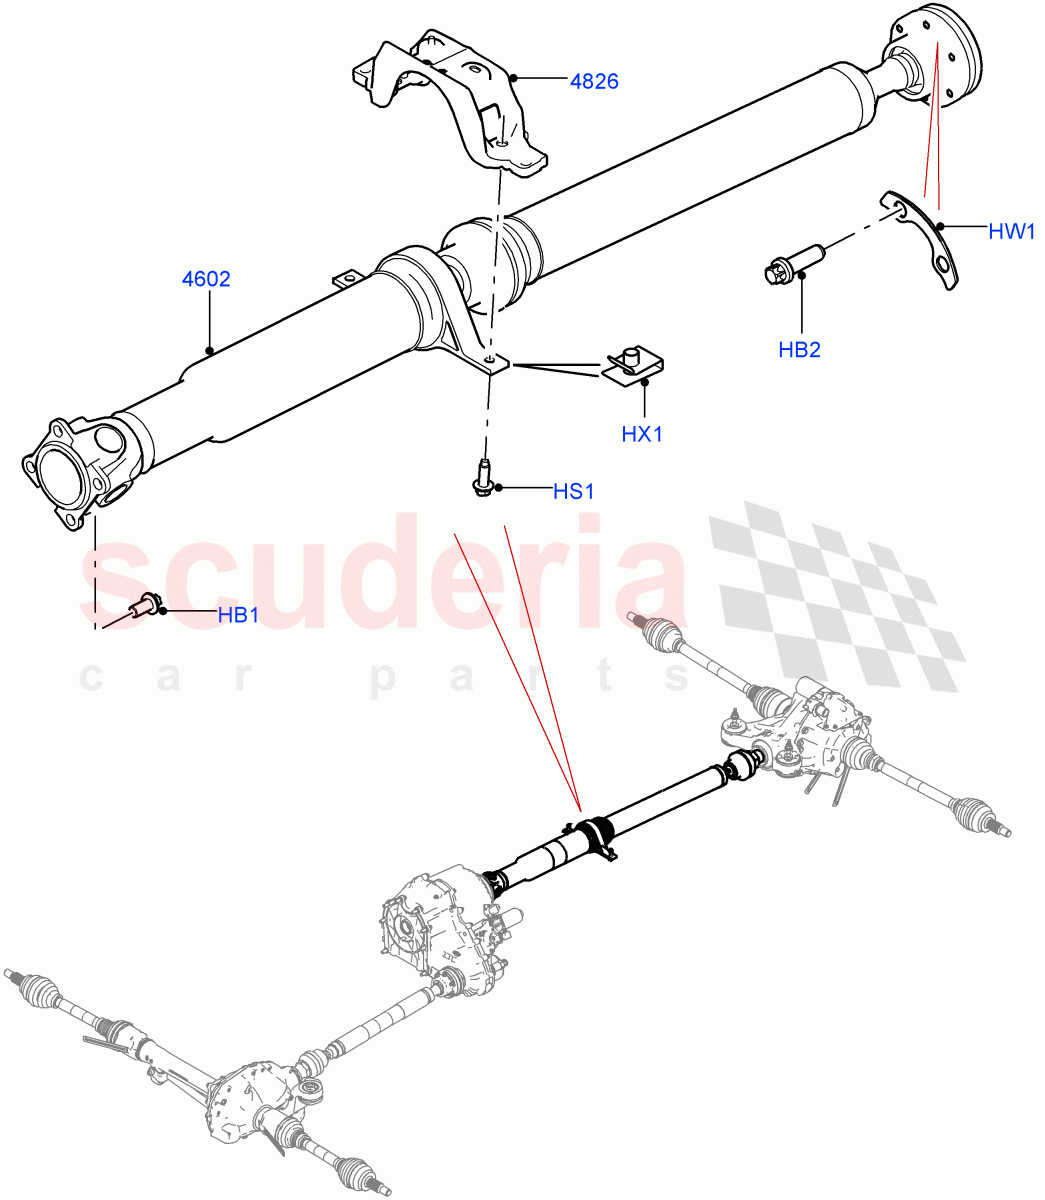 Drive Shaft - Rear Axle Drive(Solihull Plant Build, Propshaft)((V)FROMHA000001) of Land Rover Land Rover Discovery 5 (2017+) [3.0 DOHC GDI SC V6 Petrol]